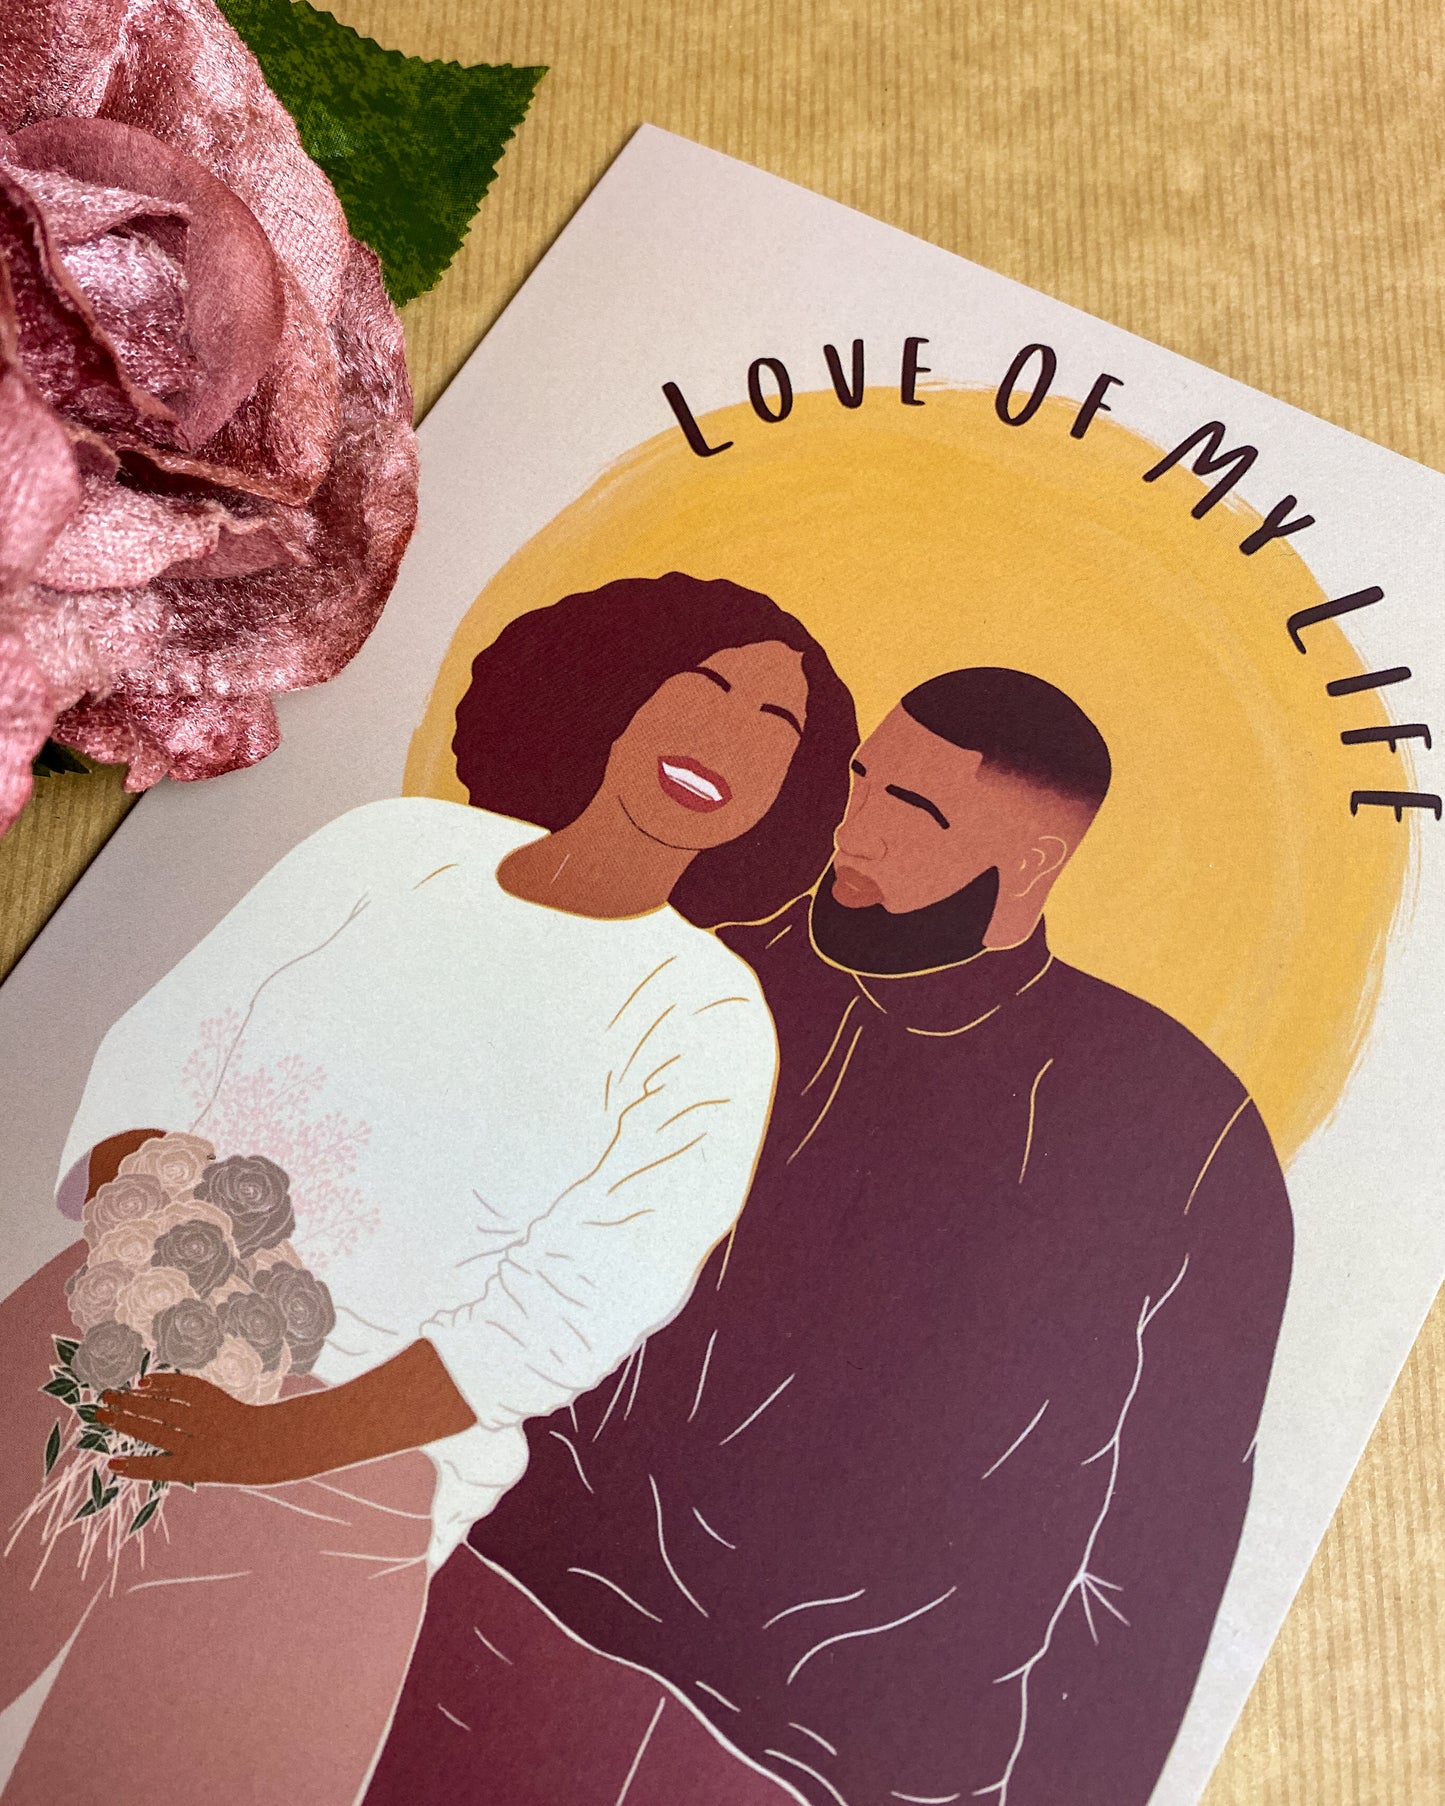 Black Lovers / Mixed Race Valentines Day Greetings Card